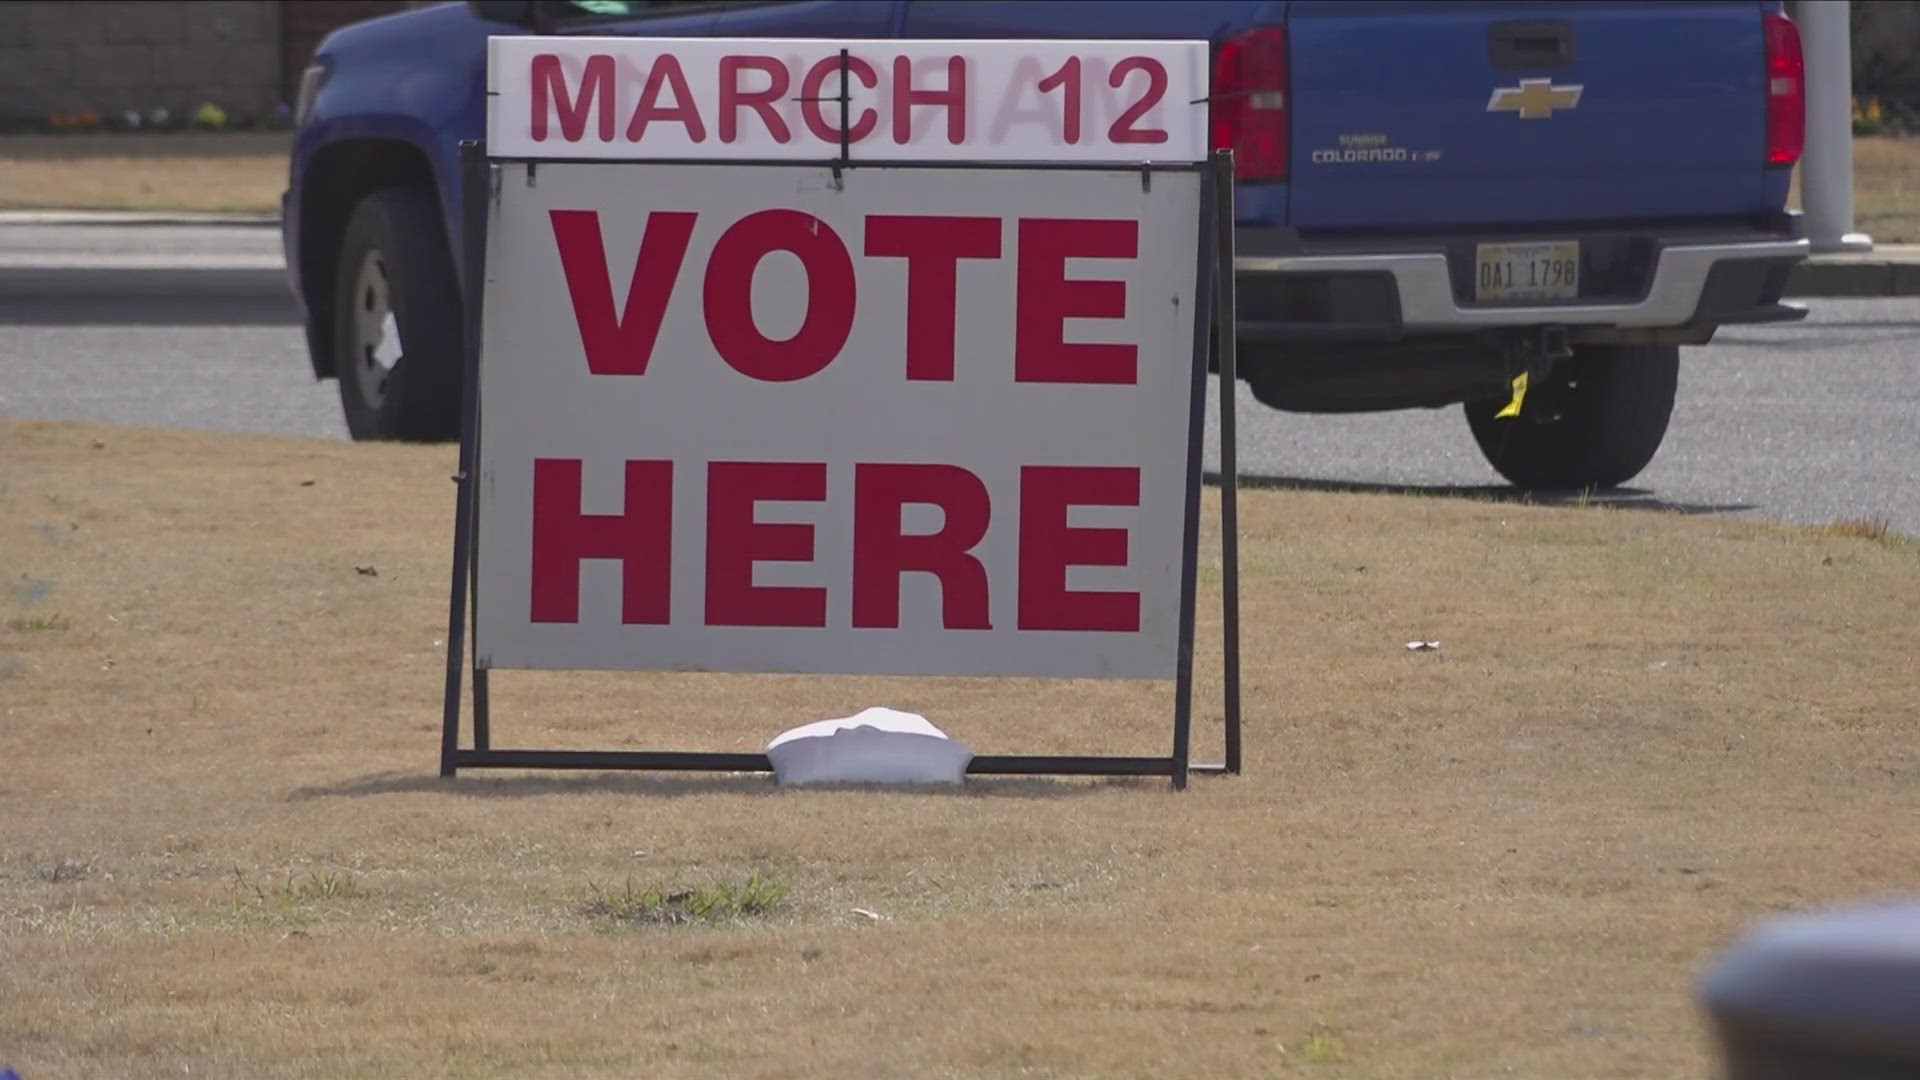 Voter turnout was extremely low for Mississippi’s primary, Tuesday, March 12, especially in DeSoto County.